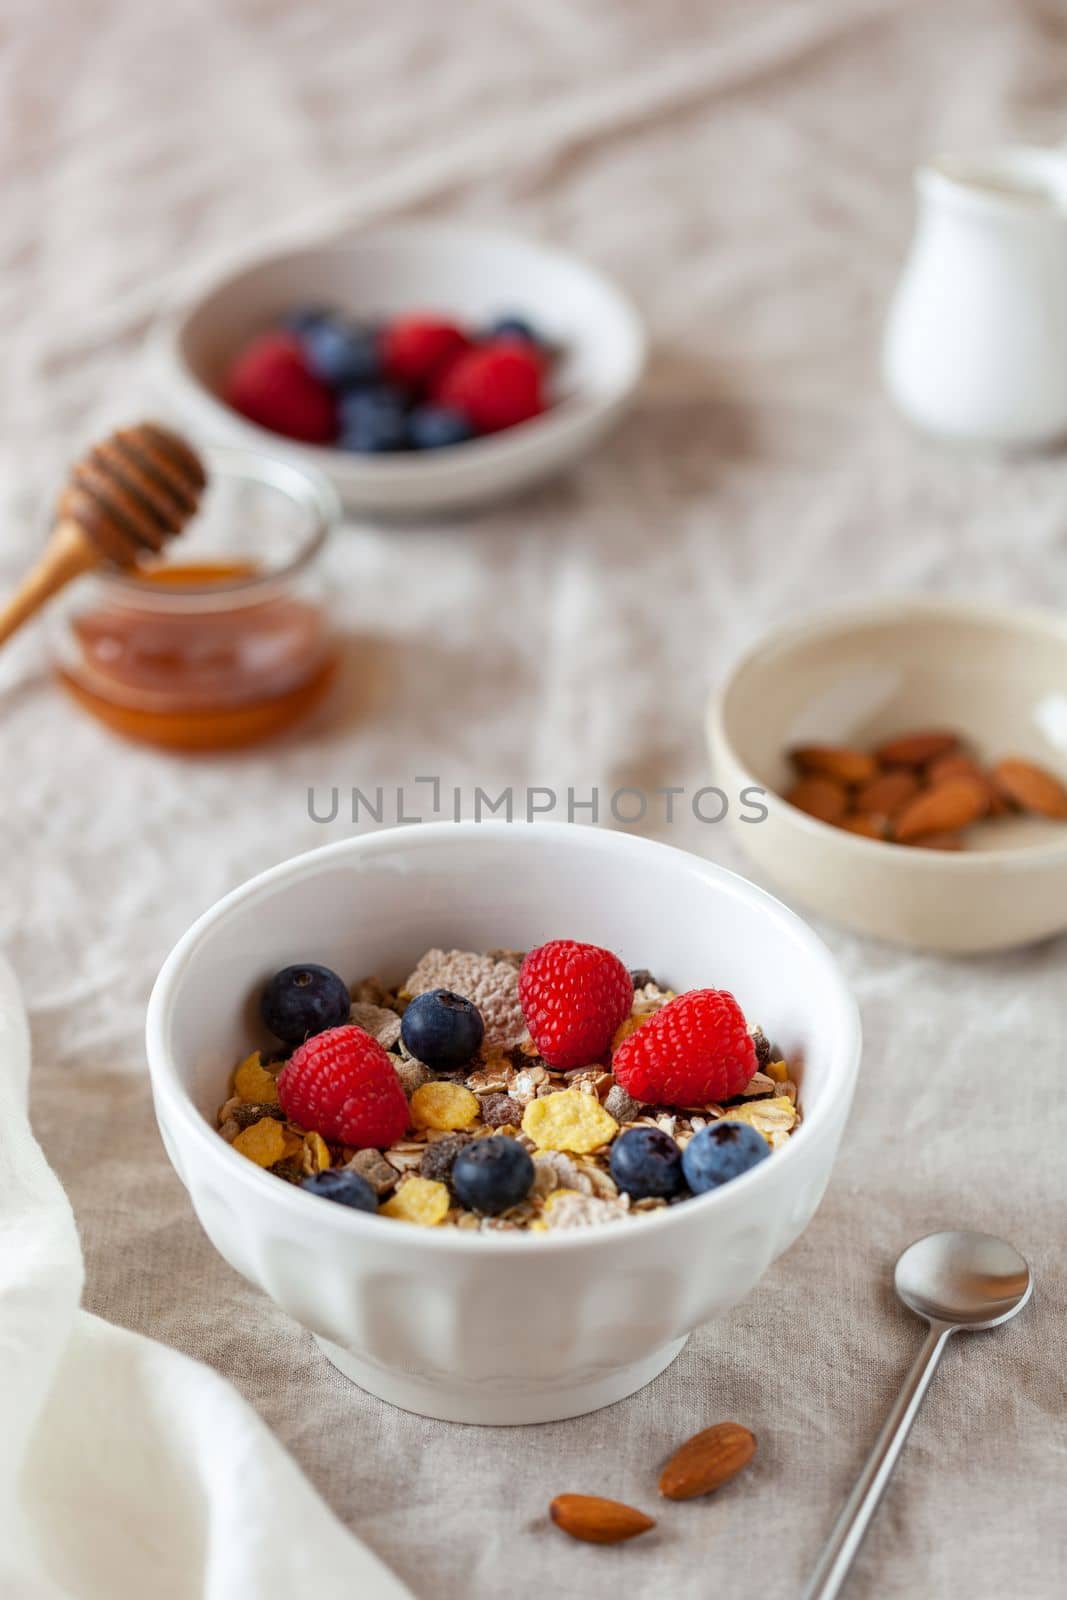 Oat flakes breakfast portion with raspberries, blueberries and honey by lanych